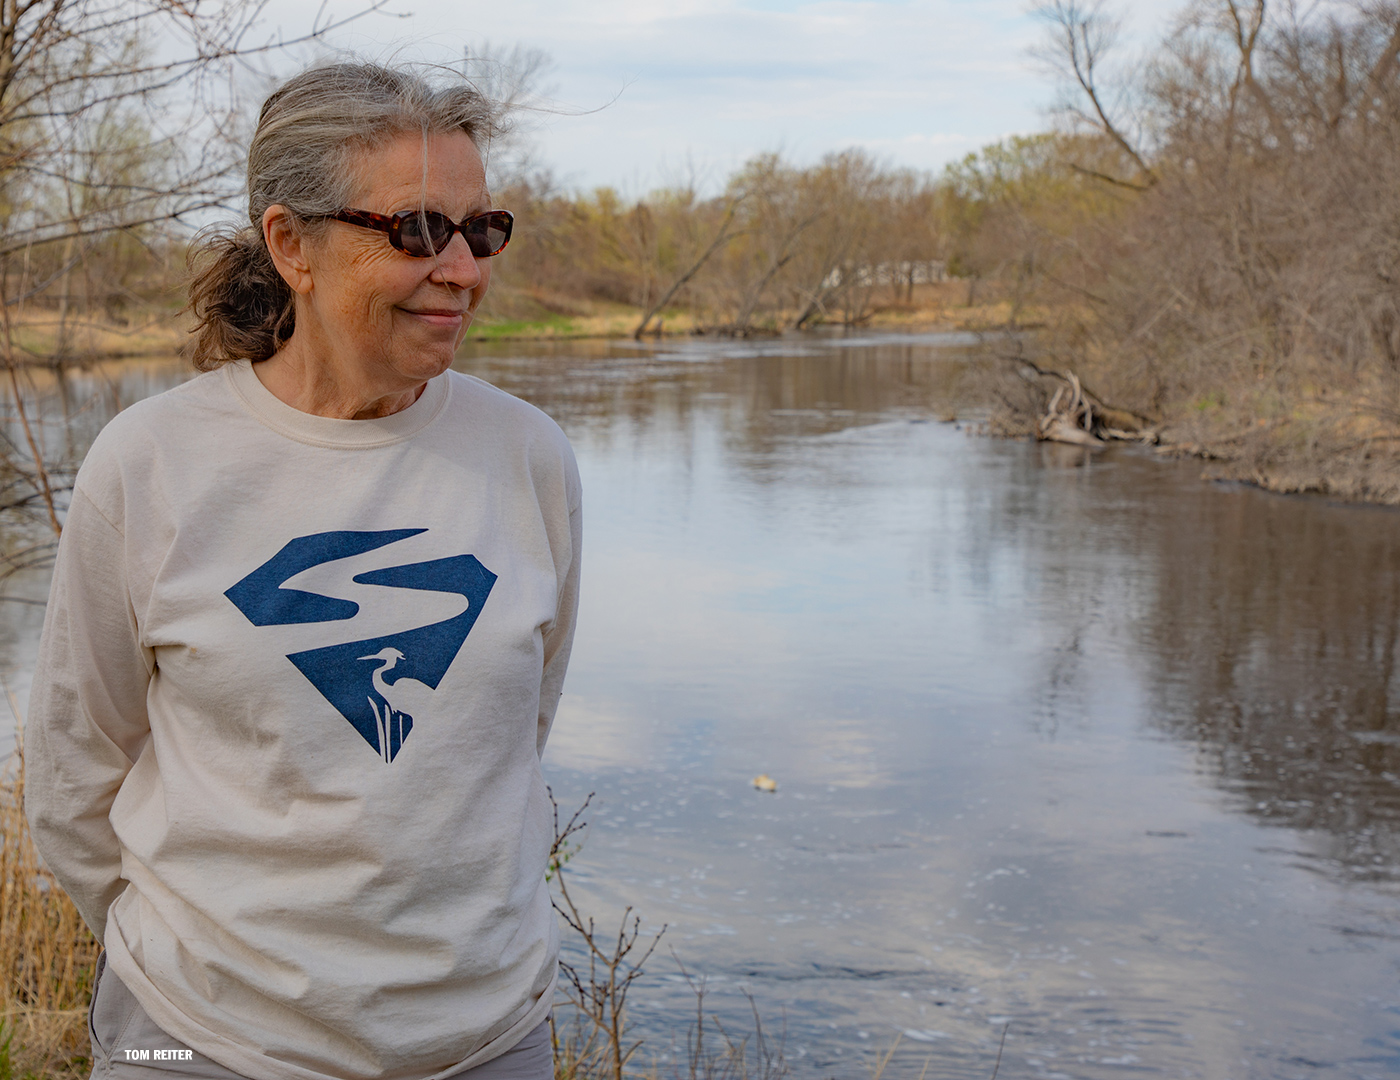 White T with blue river and heron icon on it